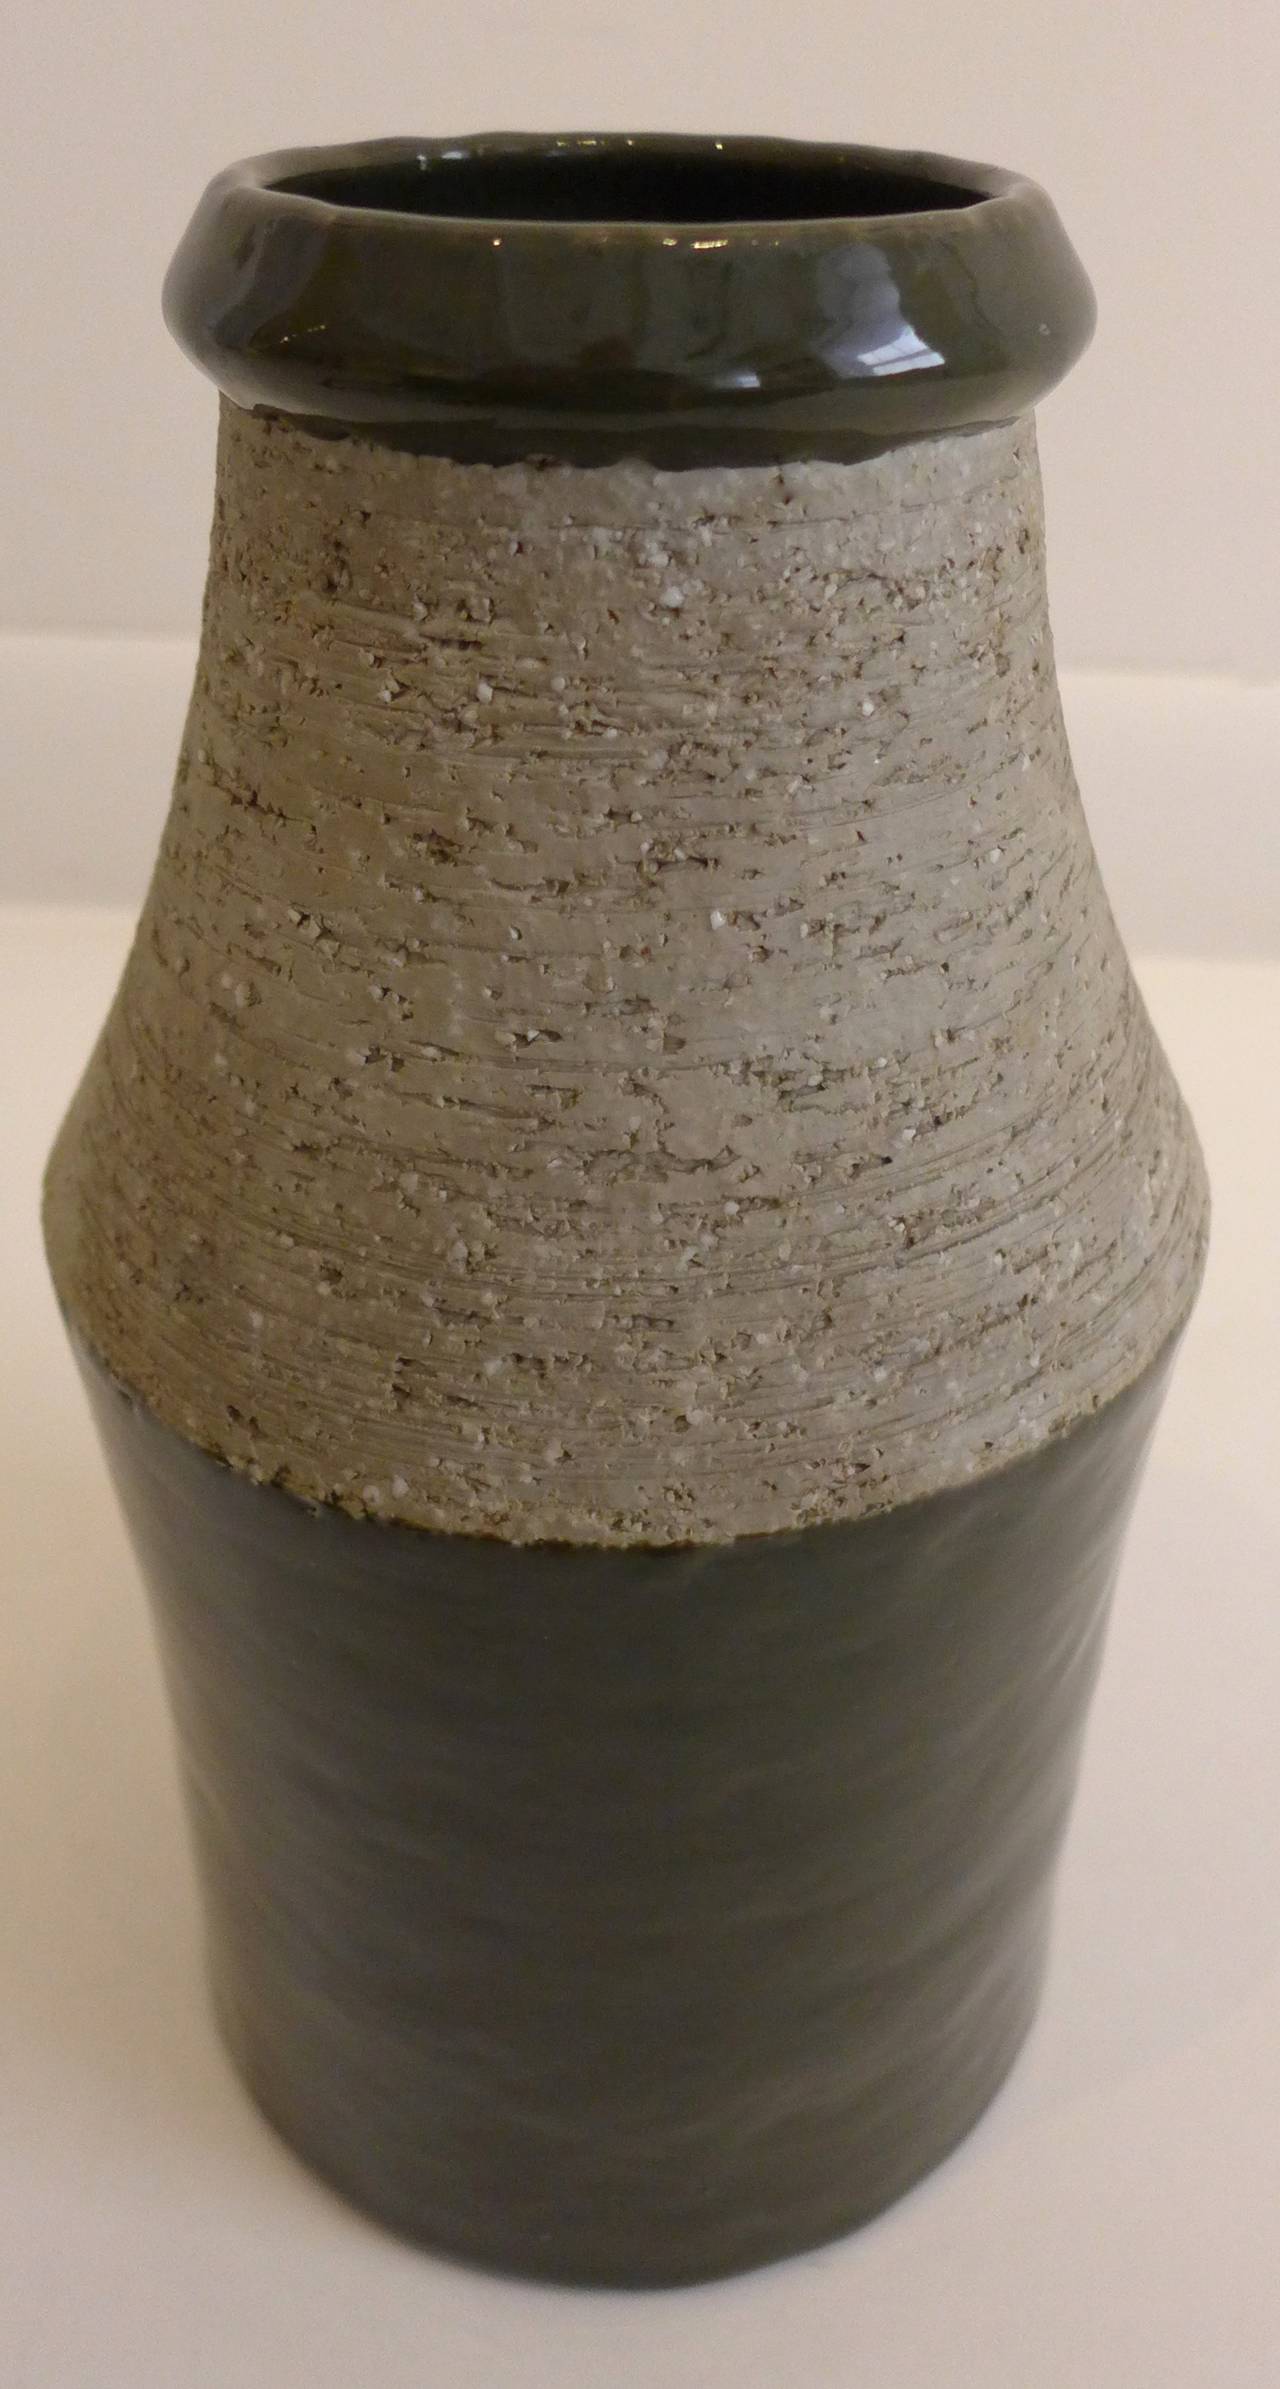 Vase with contrasting glazed and chamotte surfaces, the glazed area being dark green. By Swedish studio potter Hertha Bengtson, made at Rörstrand, circa 1960s. With painted marks on bottom.